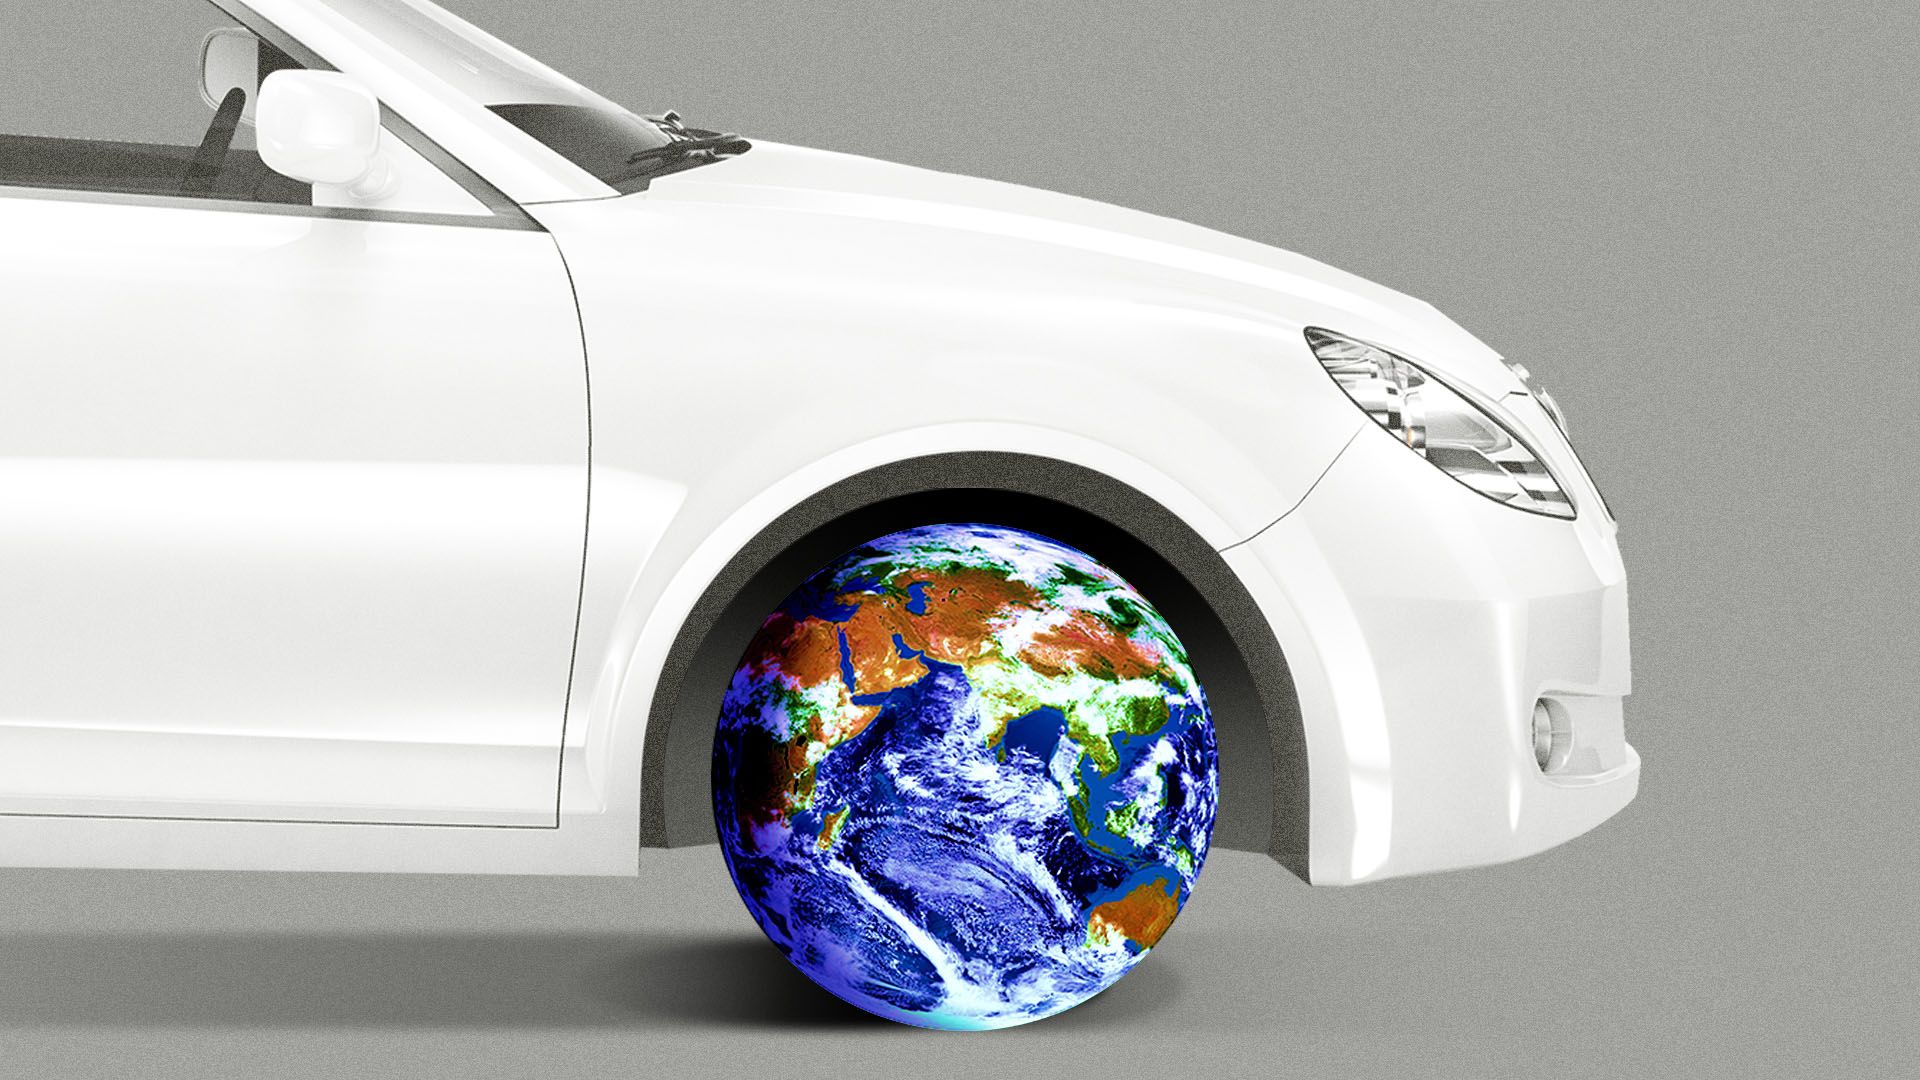 Illustration of a car with a globe for a wheel